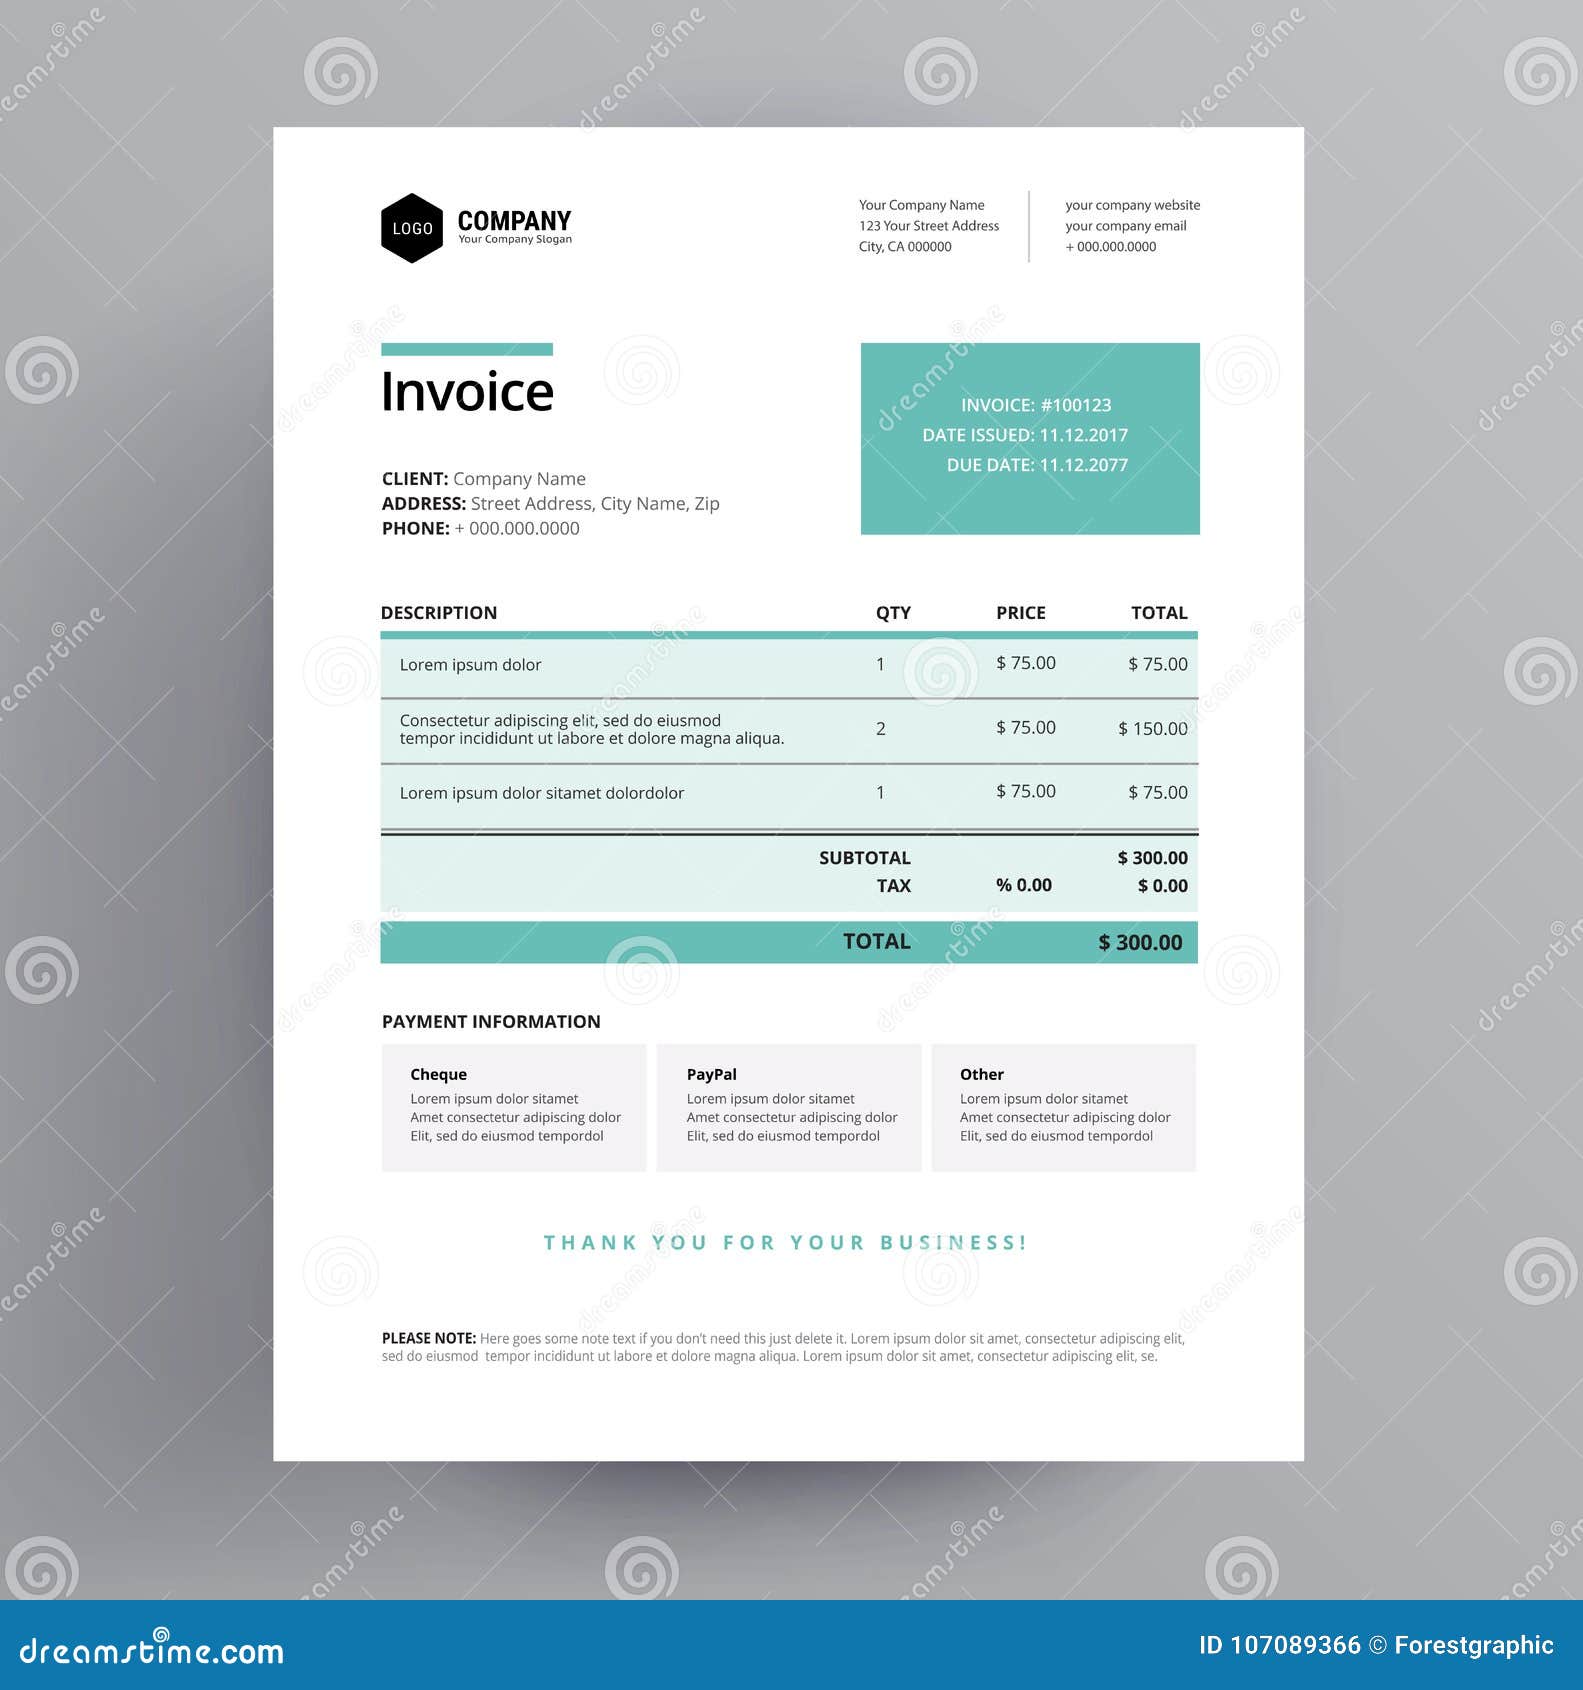 Medical Invoice Form Template for Medical Professionals - Doctor For Doctors Invoice Template